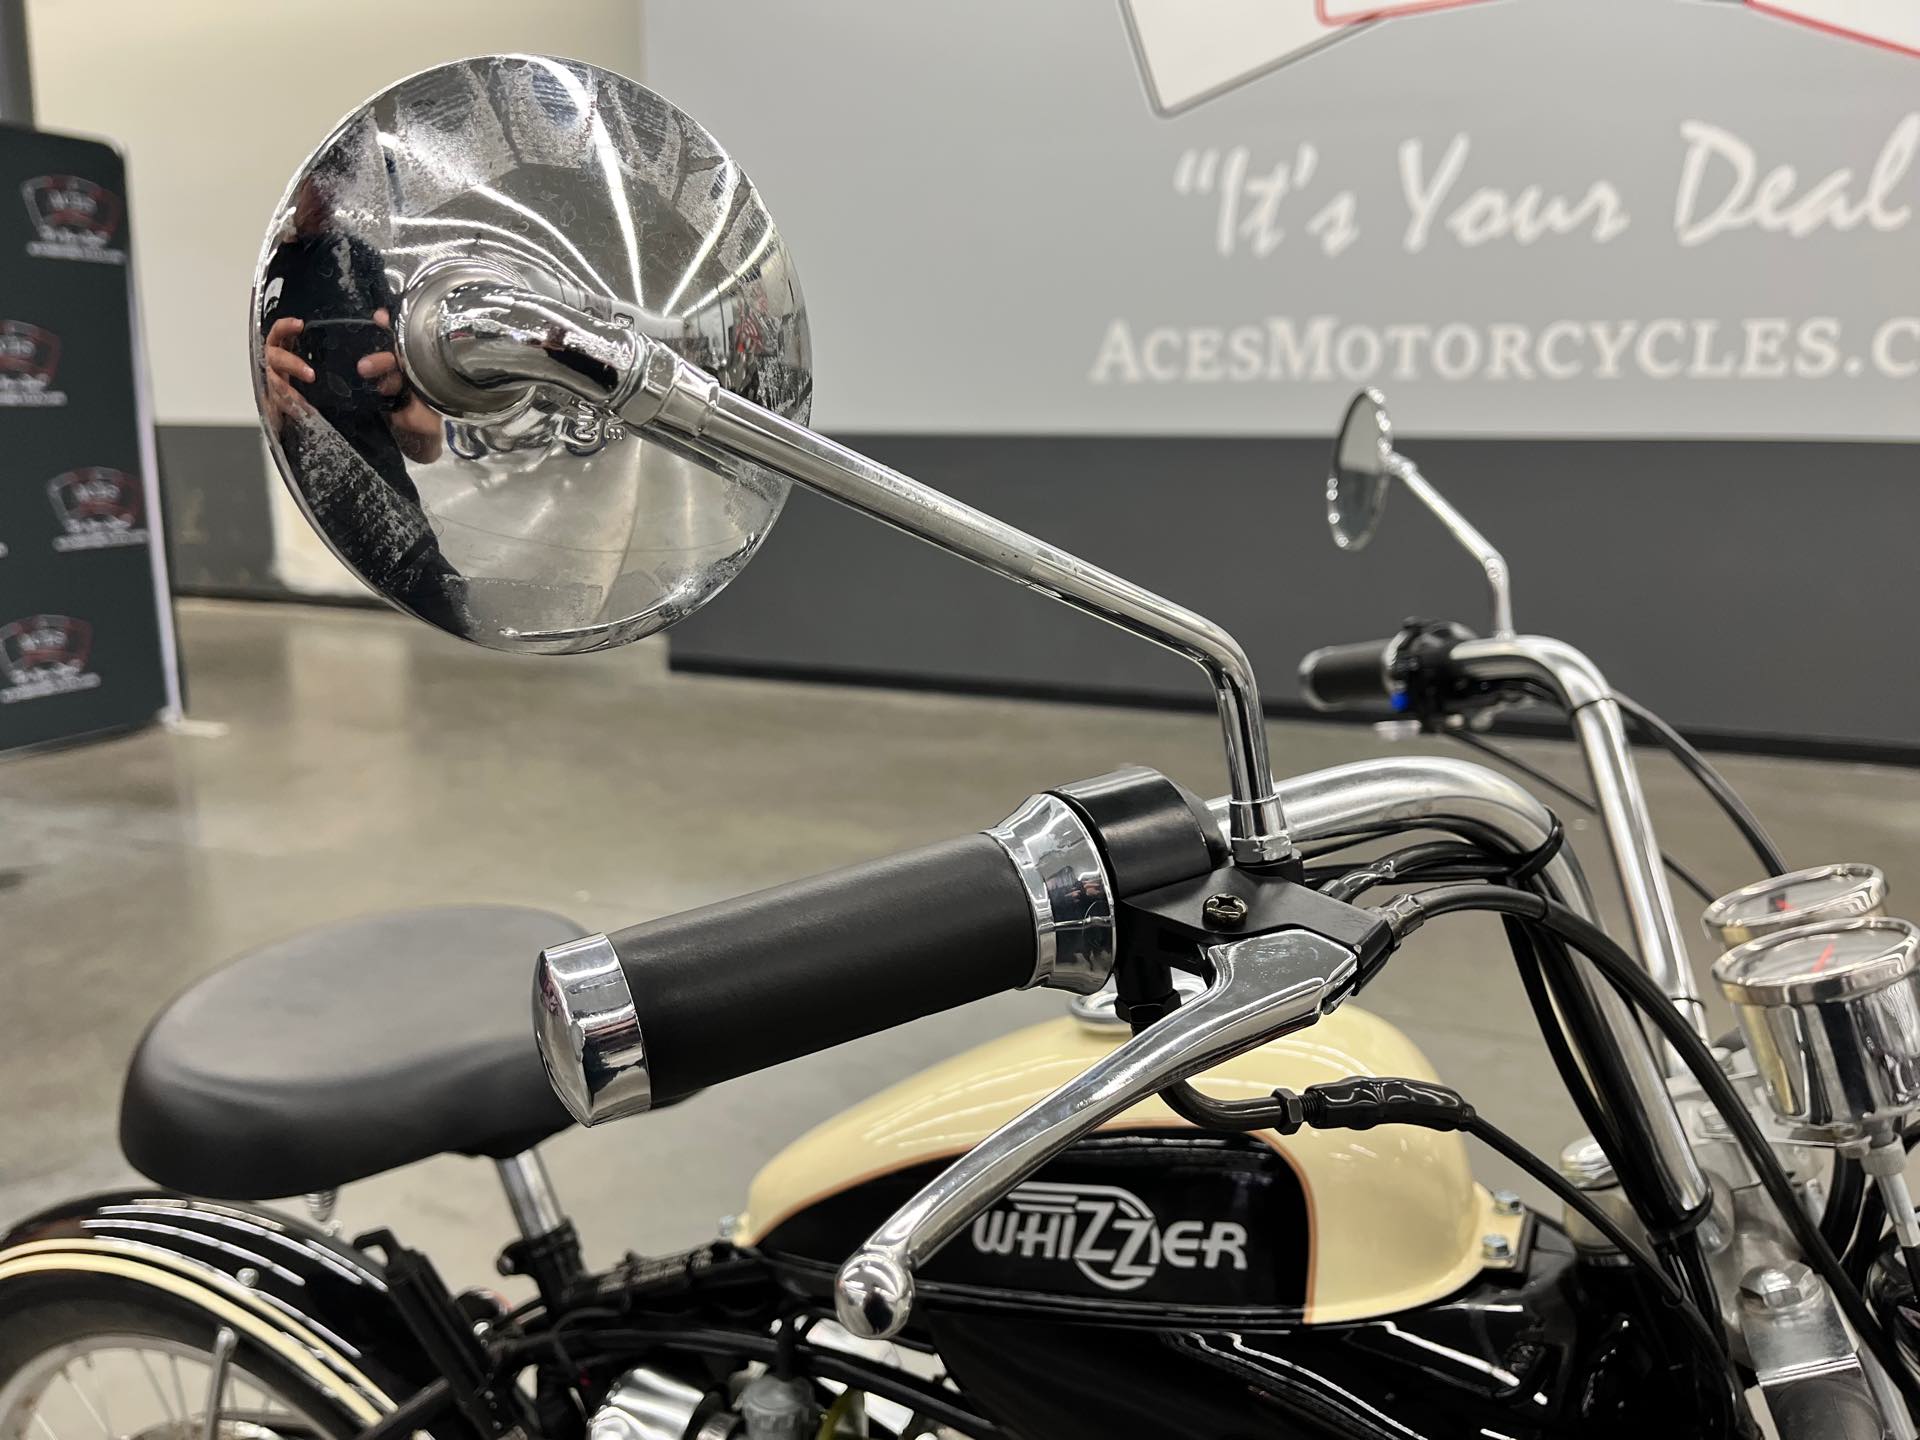 2008 WHIZZER REPLICA at Aces Motorcycles - Denver